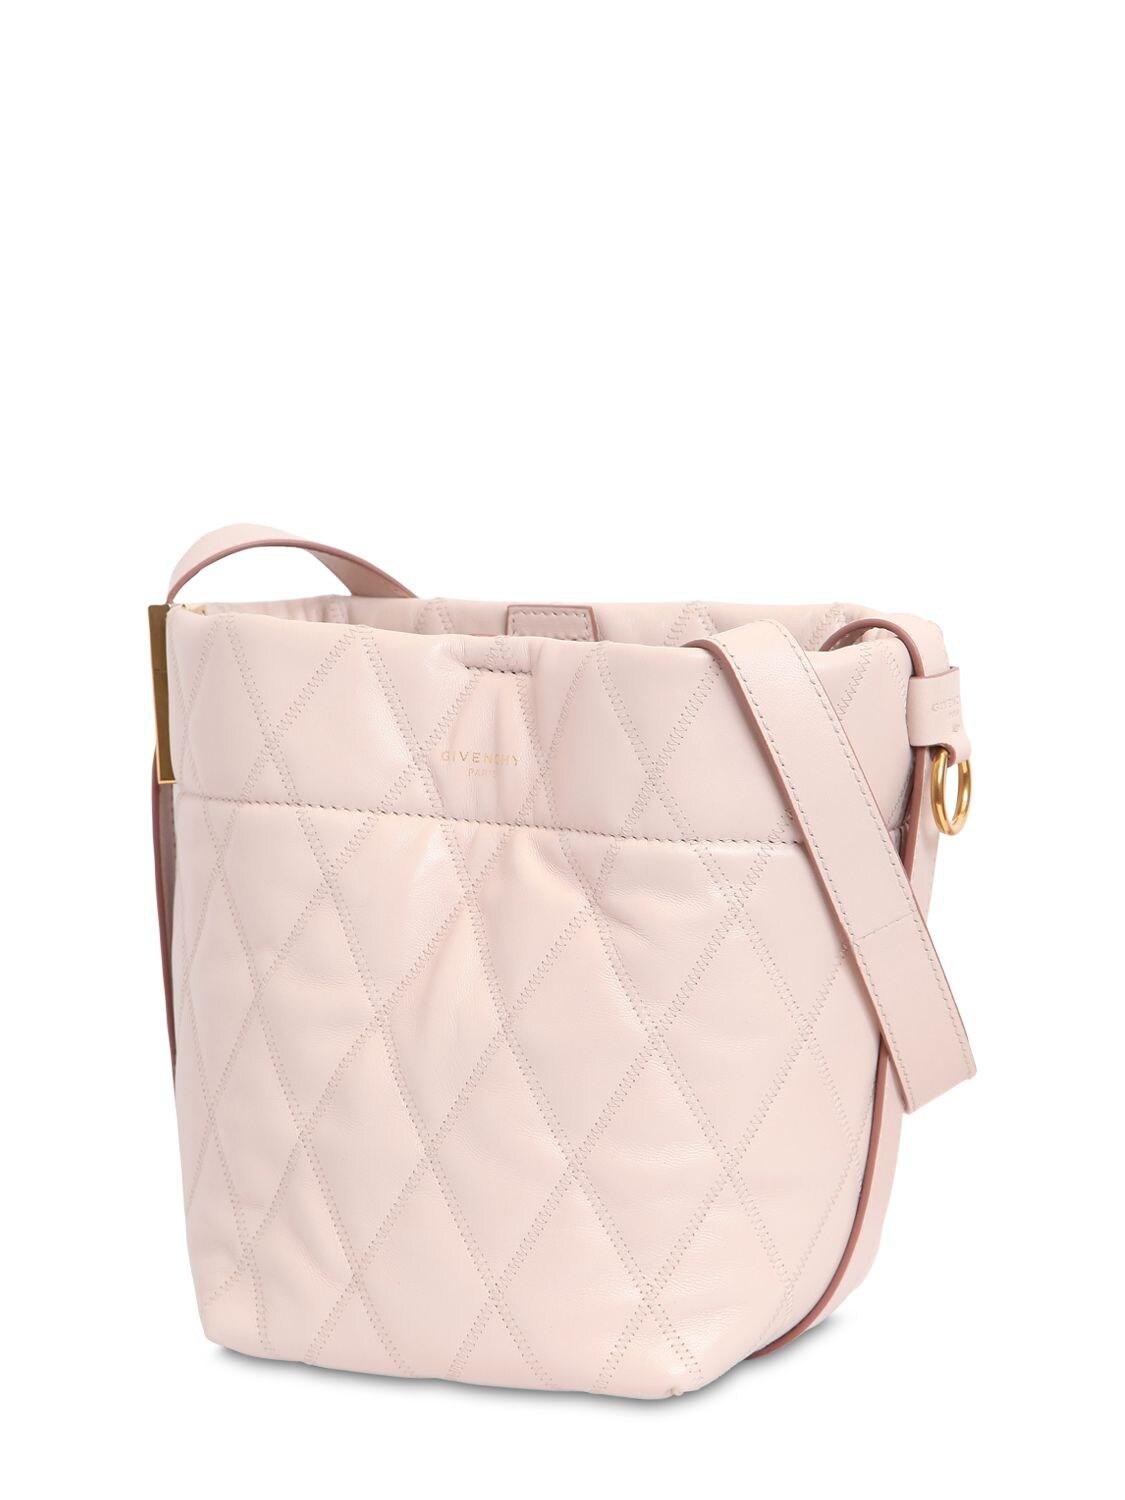 Givenchy Mini Gv Quilted Leather Bucket Bag in Light Pink (Pink) - Lyst